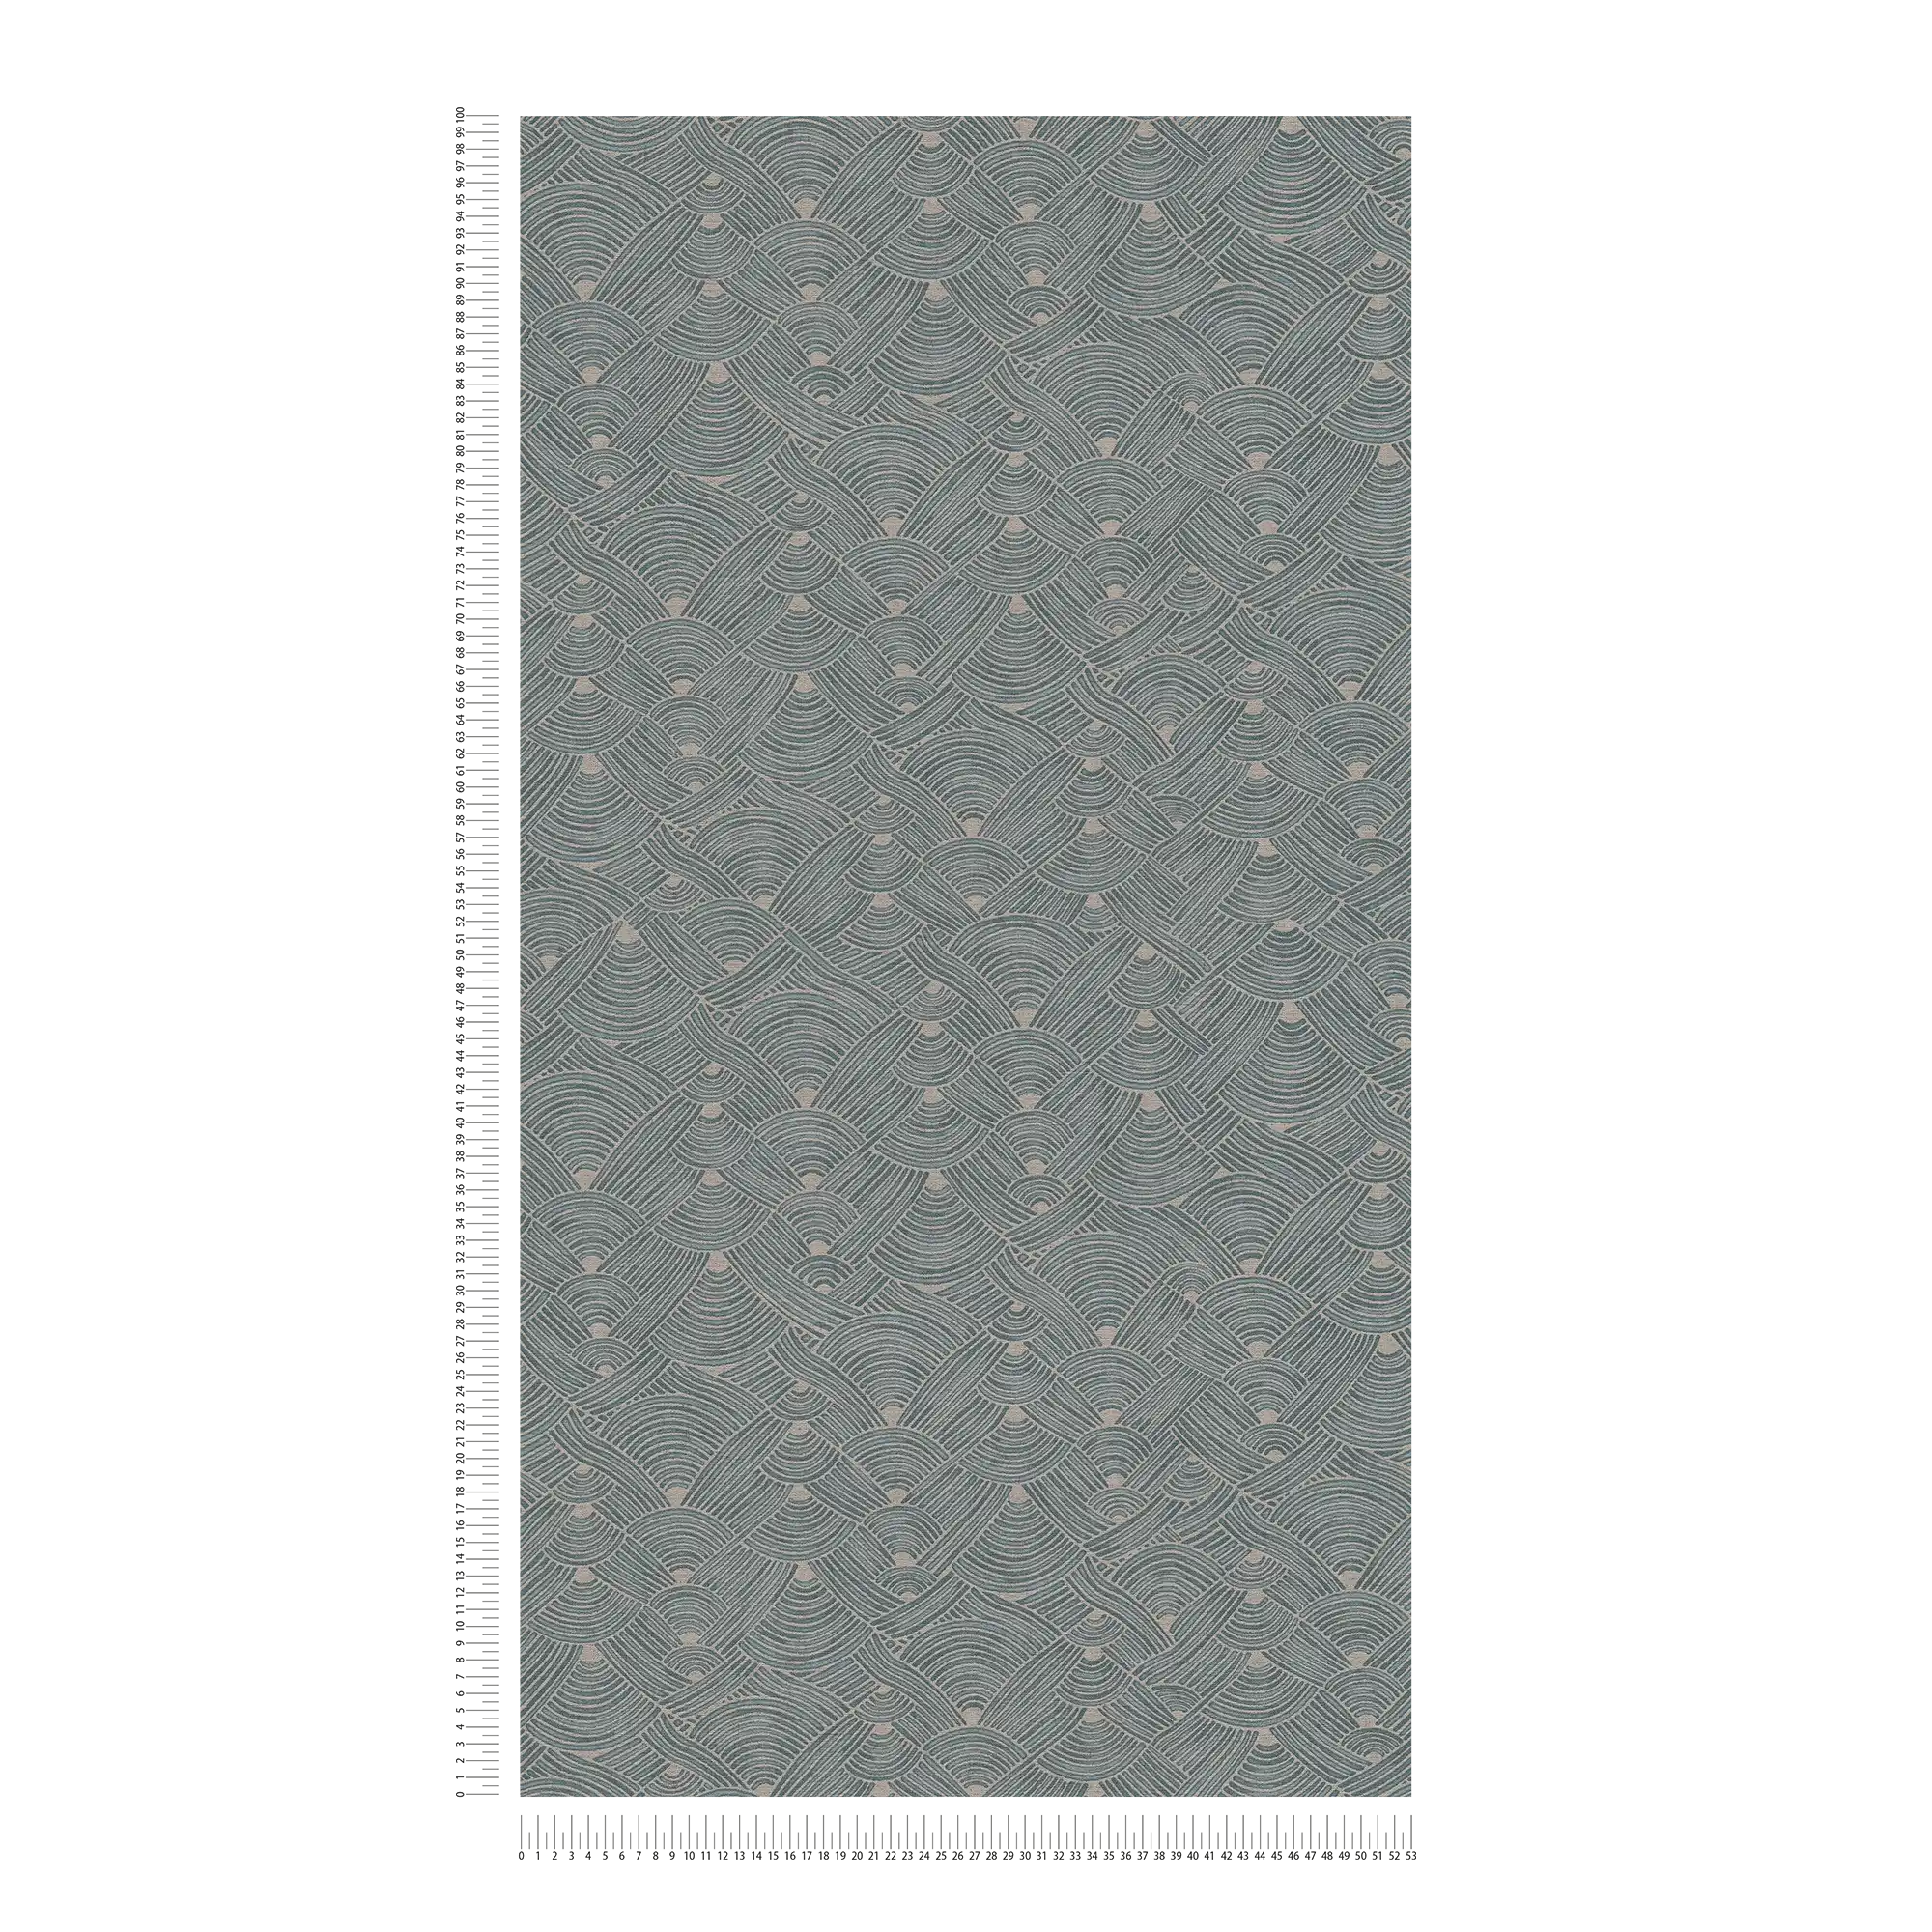             Non-woven wallpaper ethno design with basket look - blue, grey, beige
        